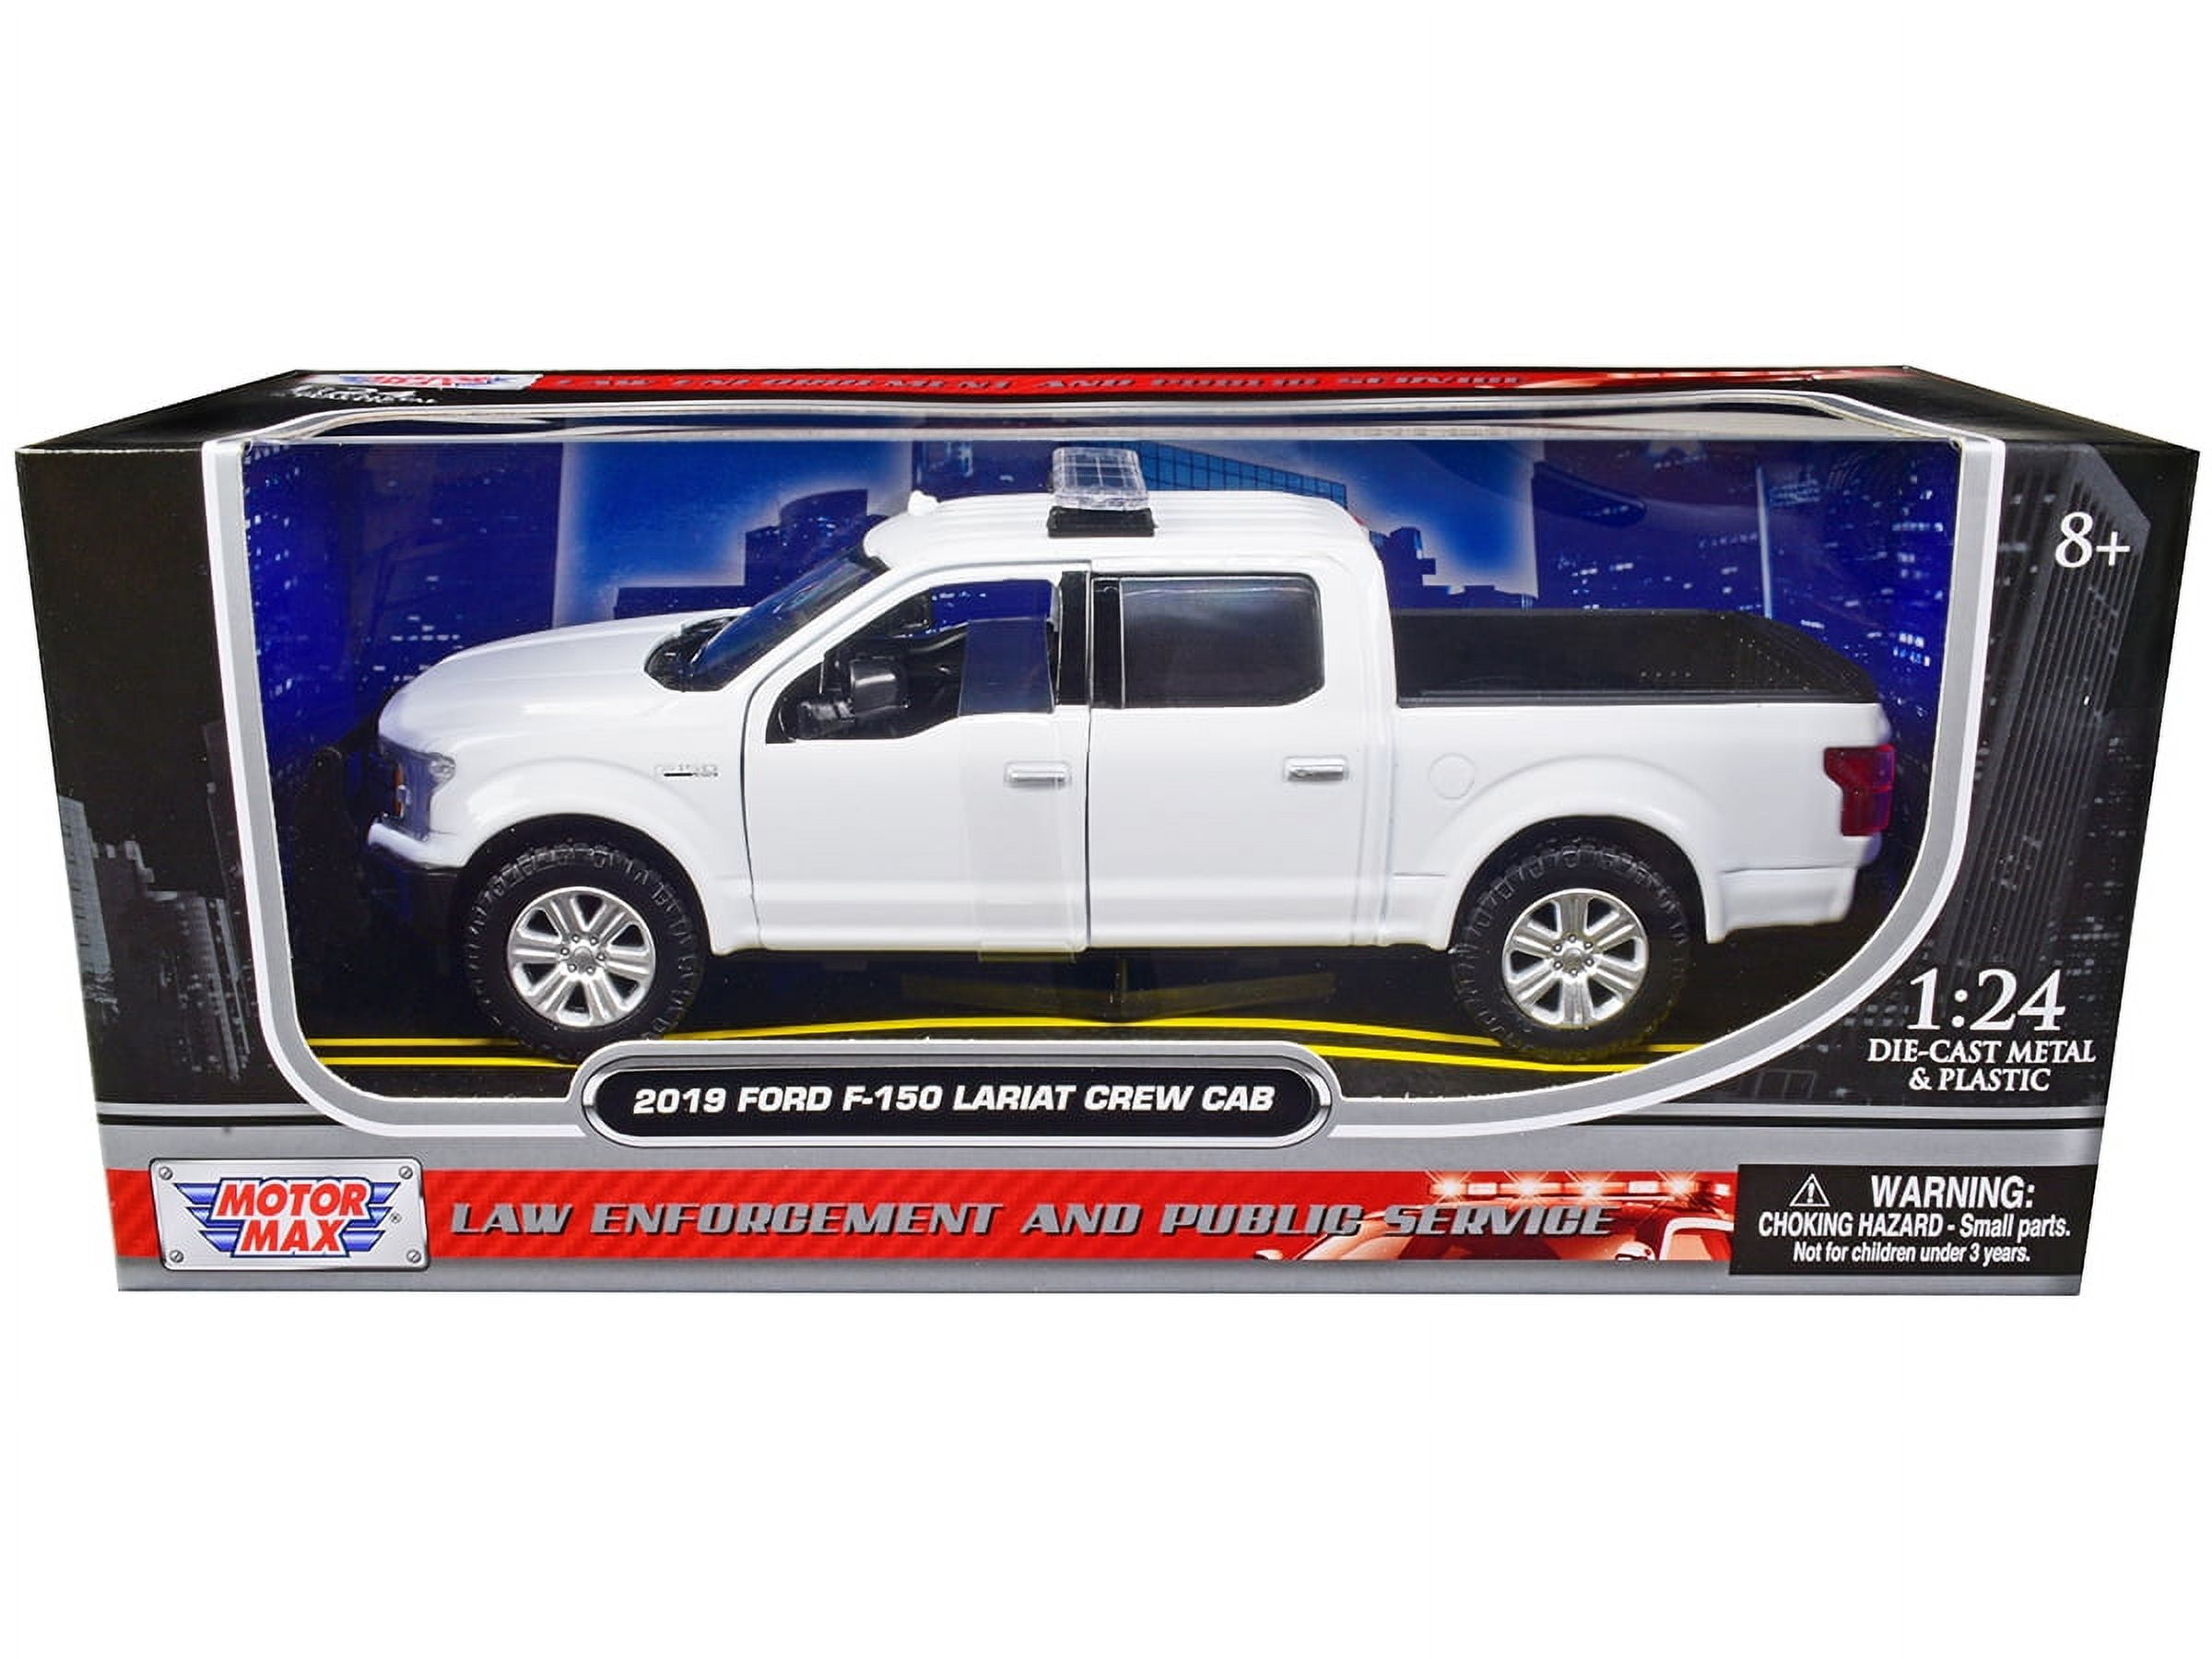 76981bk Unmarked Plain Black Law Enforcement & Public Service Series 1 by 24 Scale Diecast Model Car for 2019 Ford F-150 Lariat Crew Cab Pickup Truck -  MOTORMAX